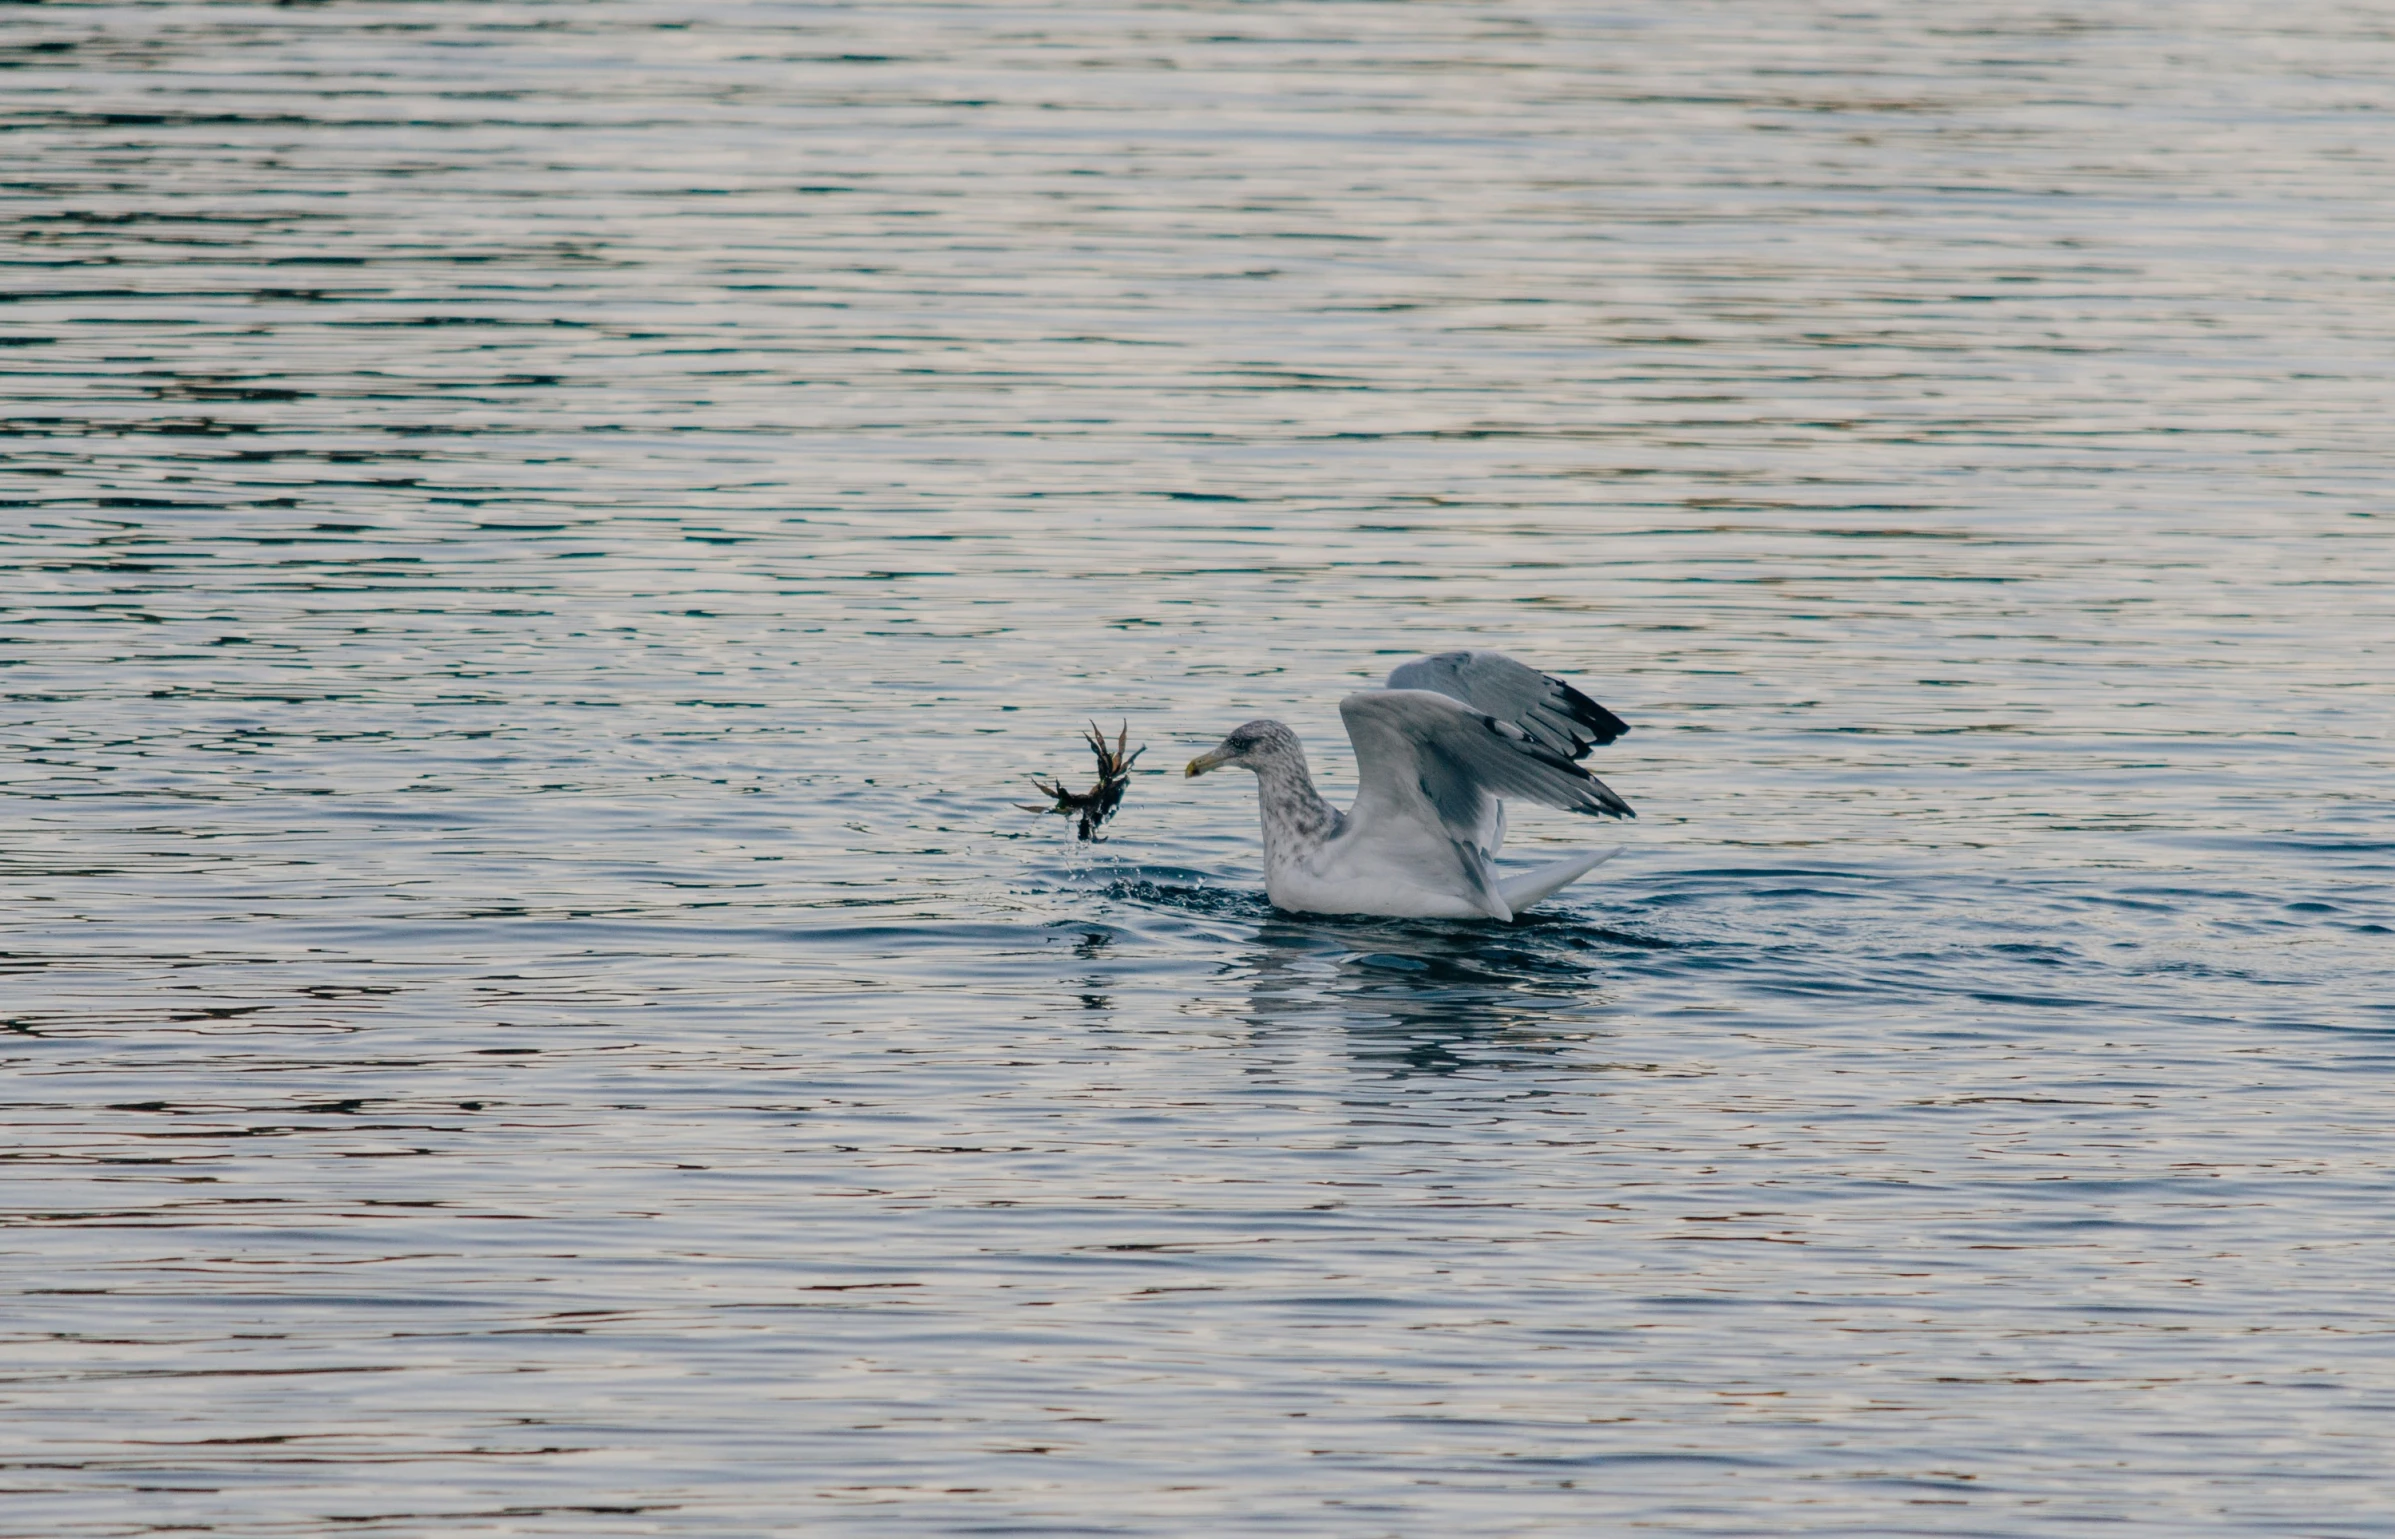 a white bird is flying low to the water